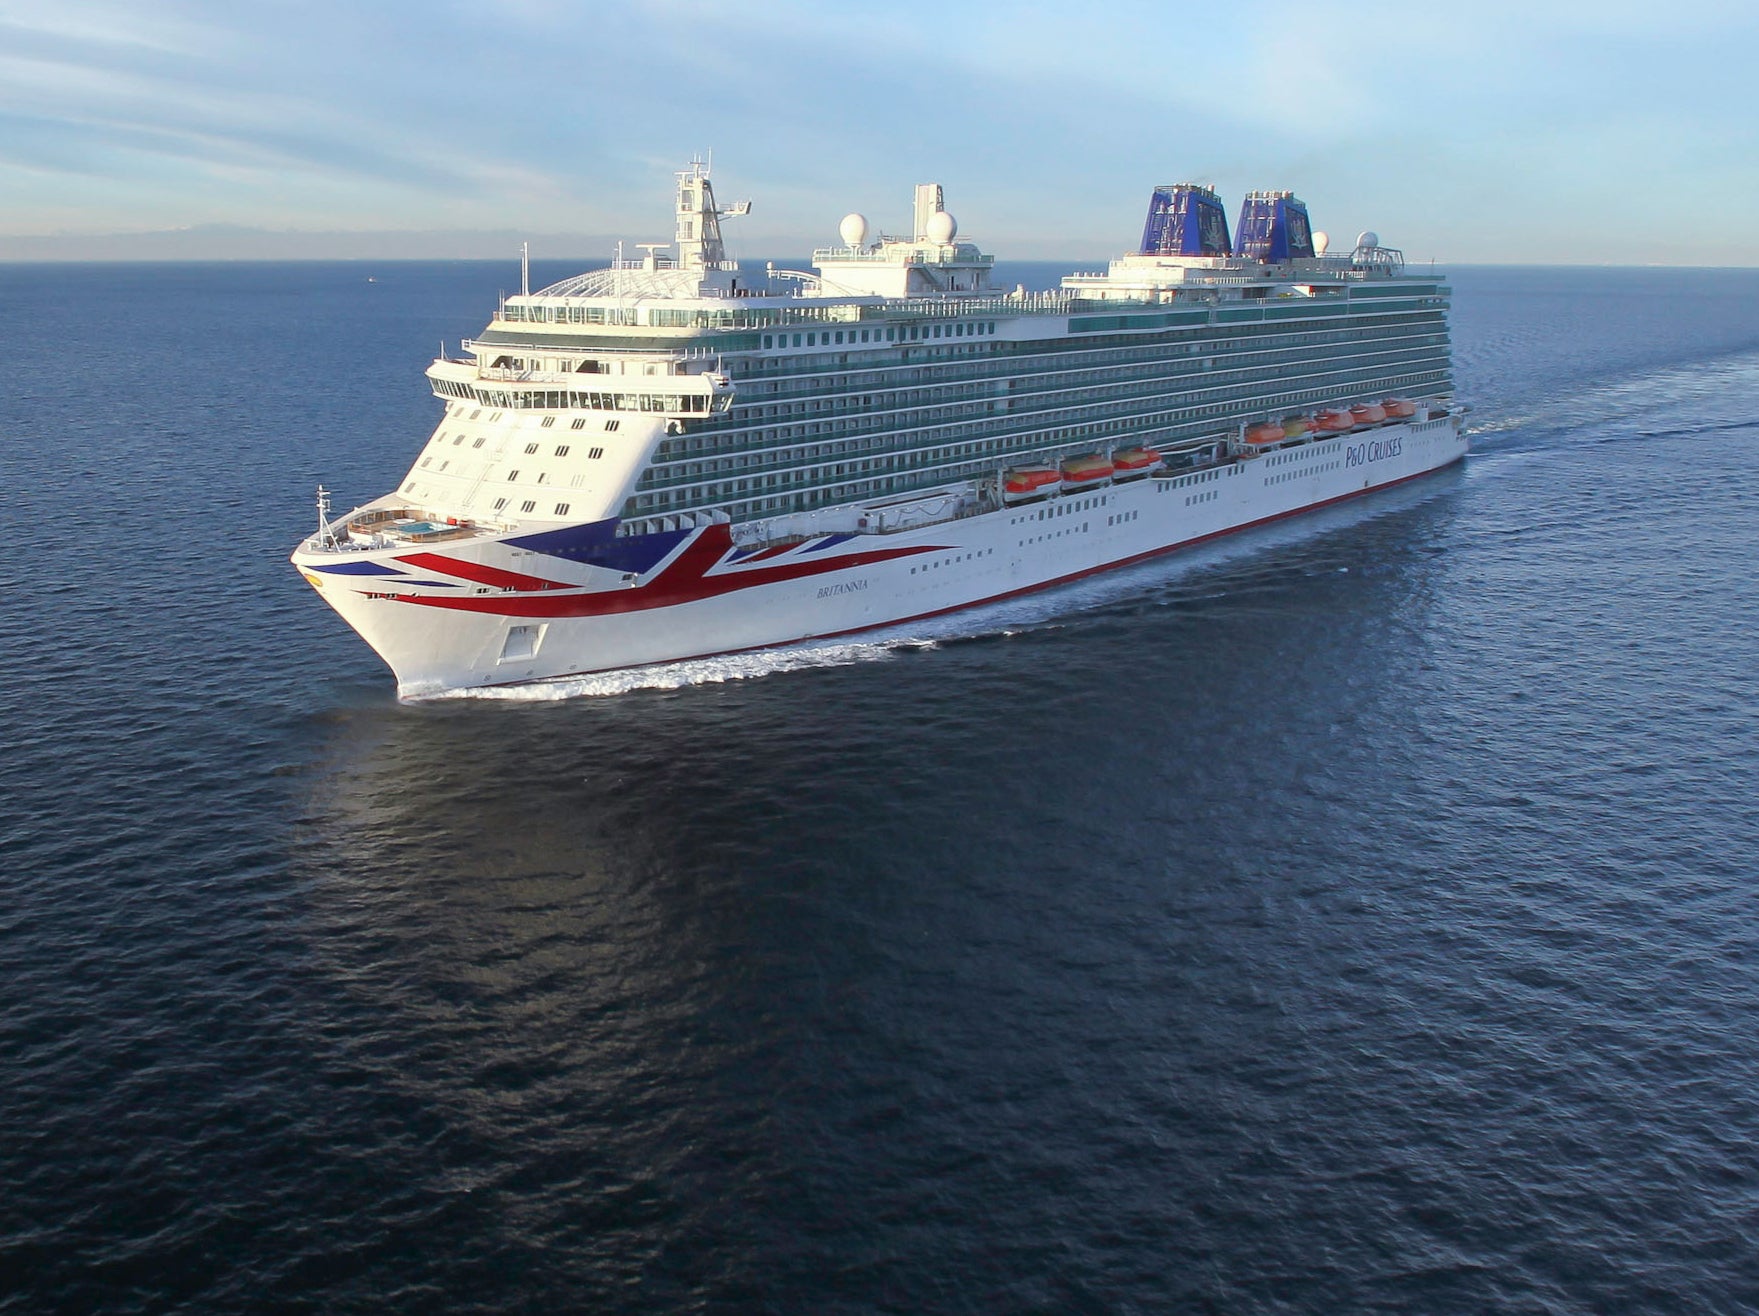 P&O Cruises will take passengers on ‘voyages to nowhere’ around the UK this summer